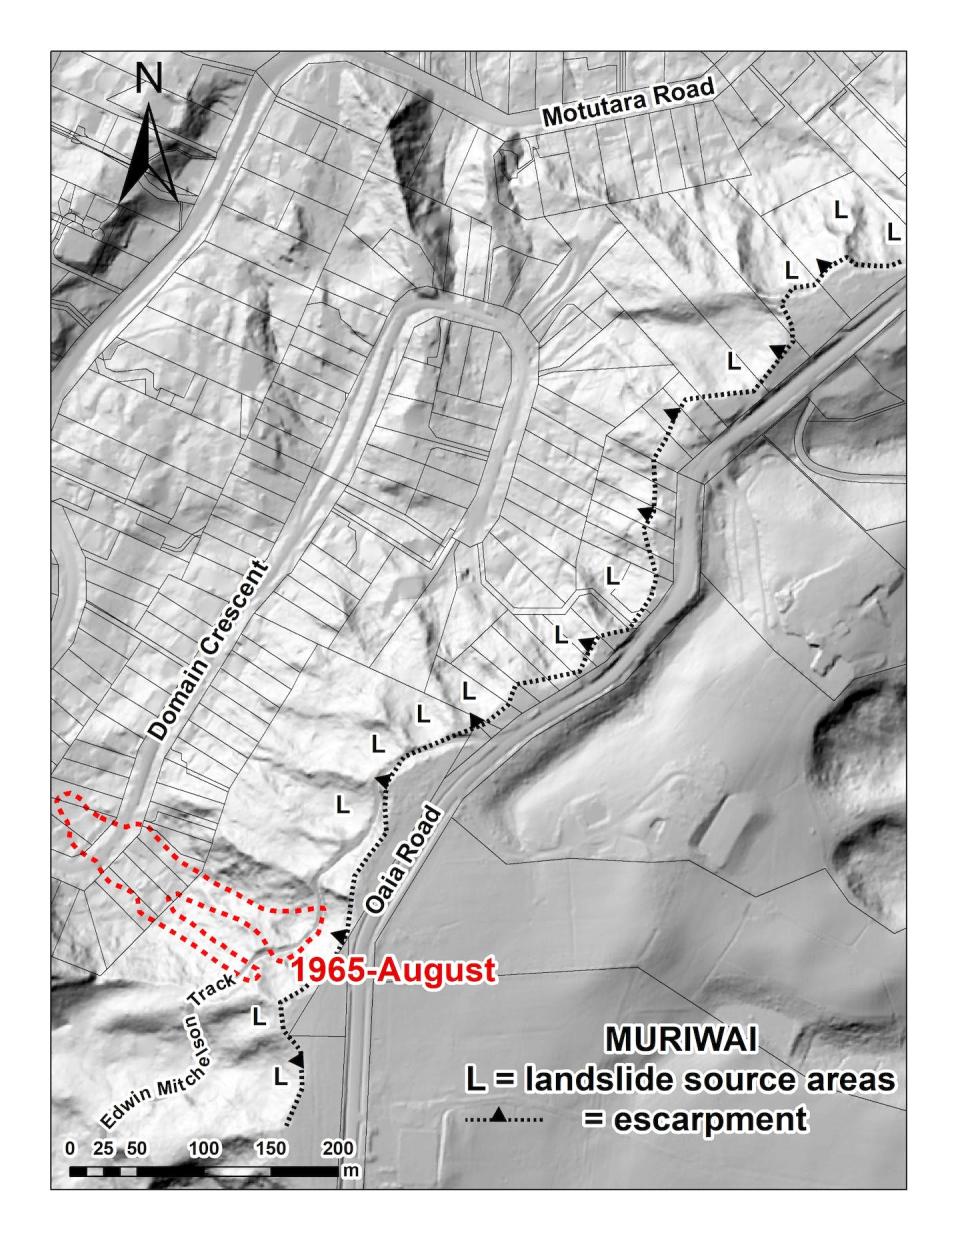 This digital elevation model shows former landslides, roads and properties in Muriwai. Author provided